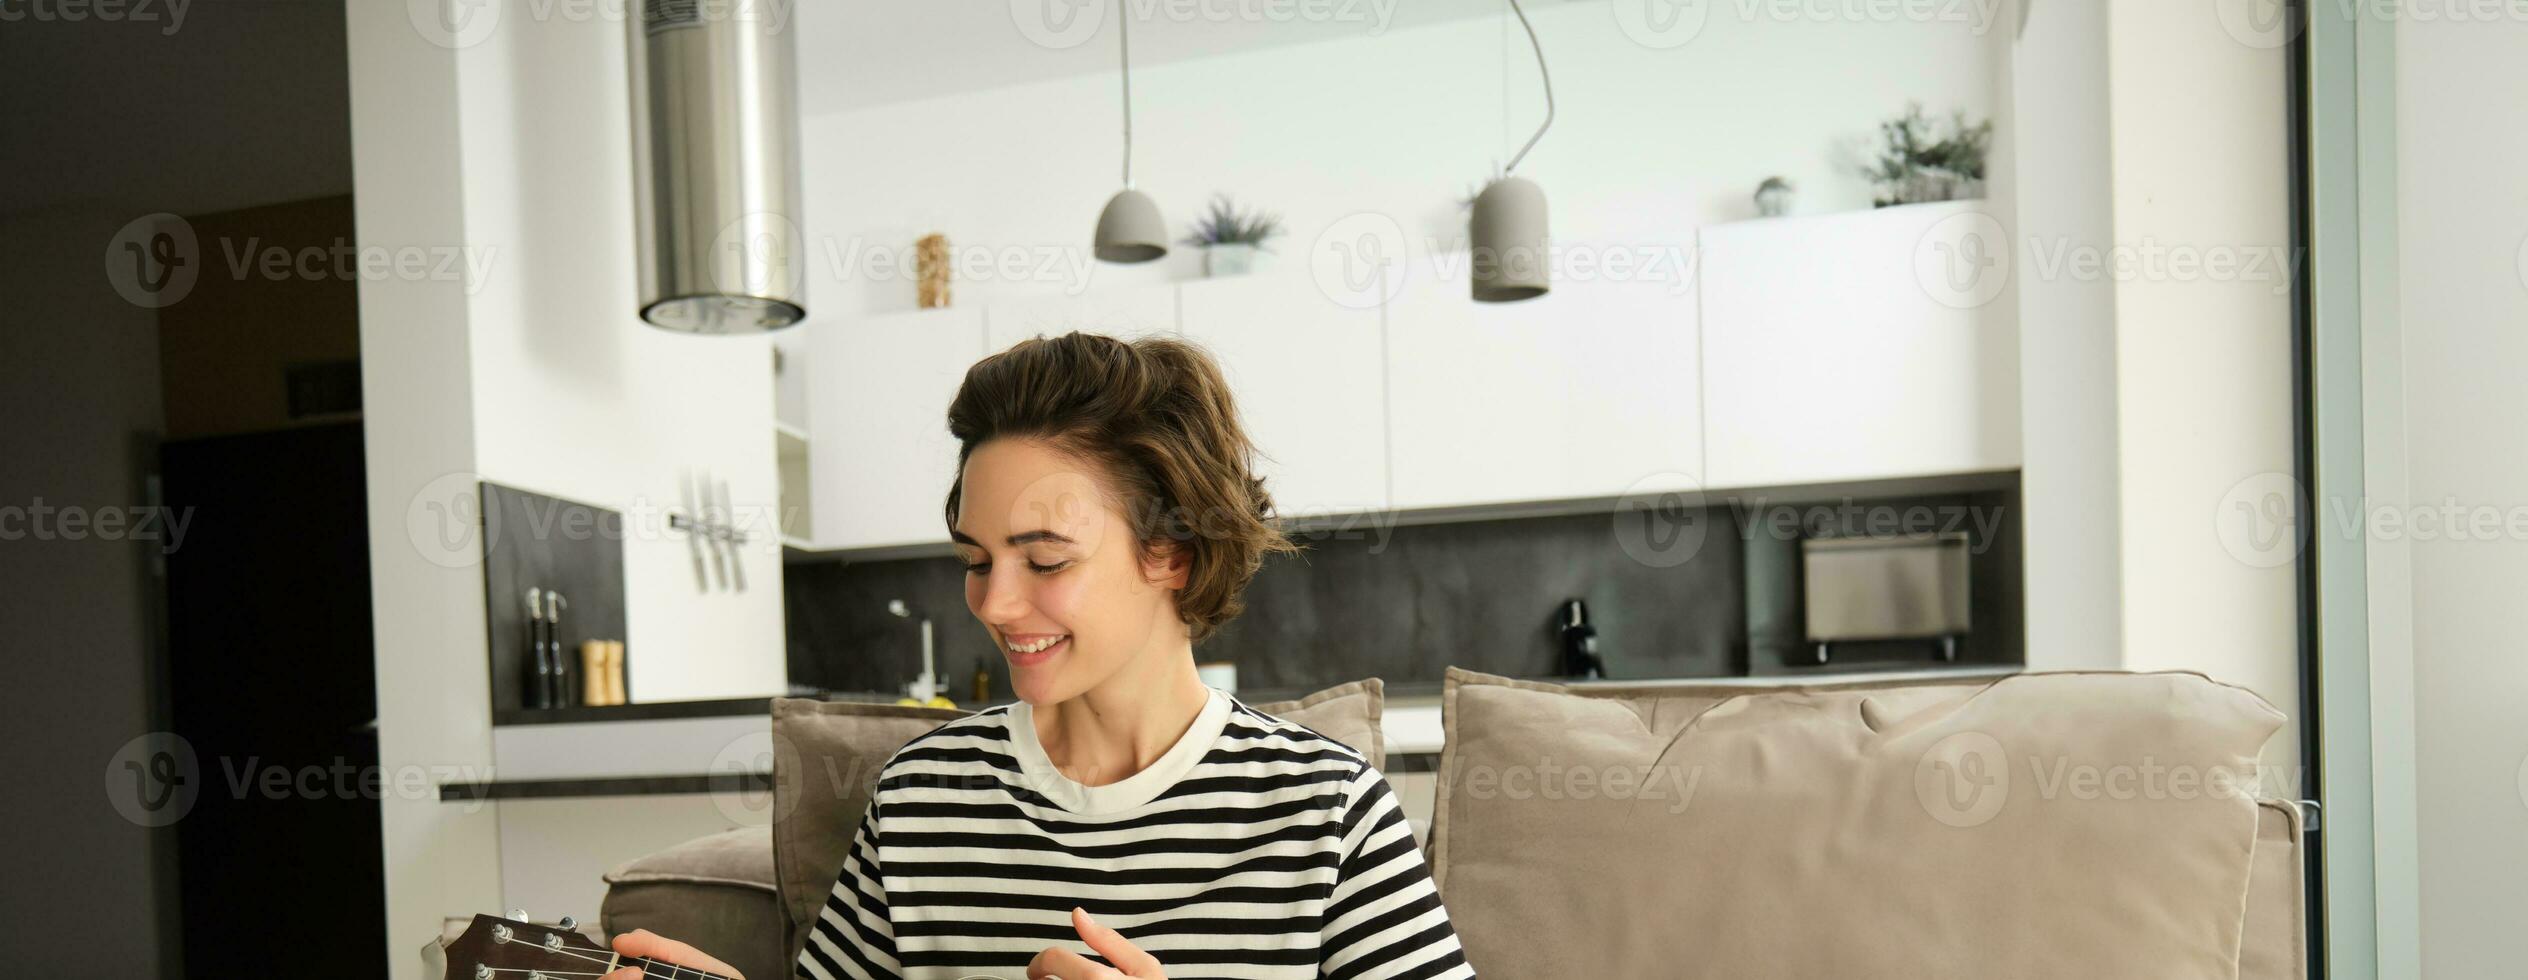 Vertical portrait of happy young woman playing ukulele, learns new musical instrument, sits on sofa at home, smiling with joy photo